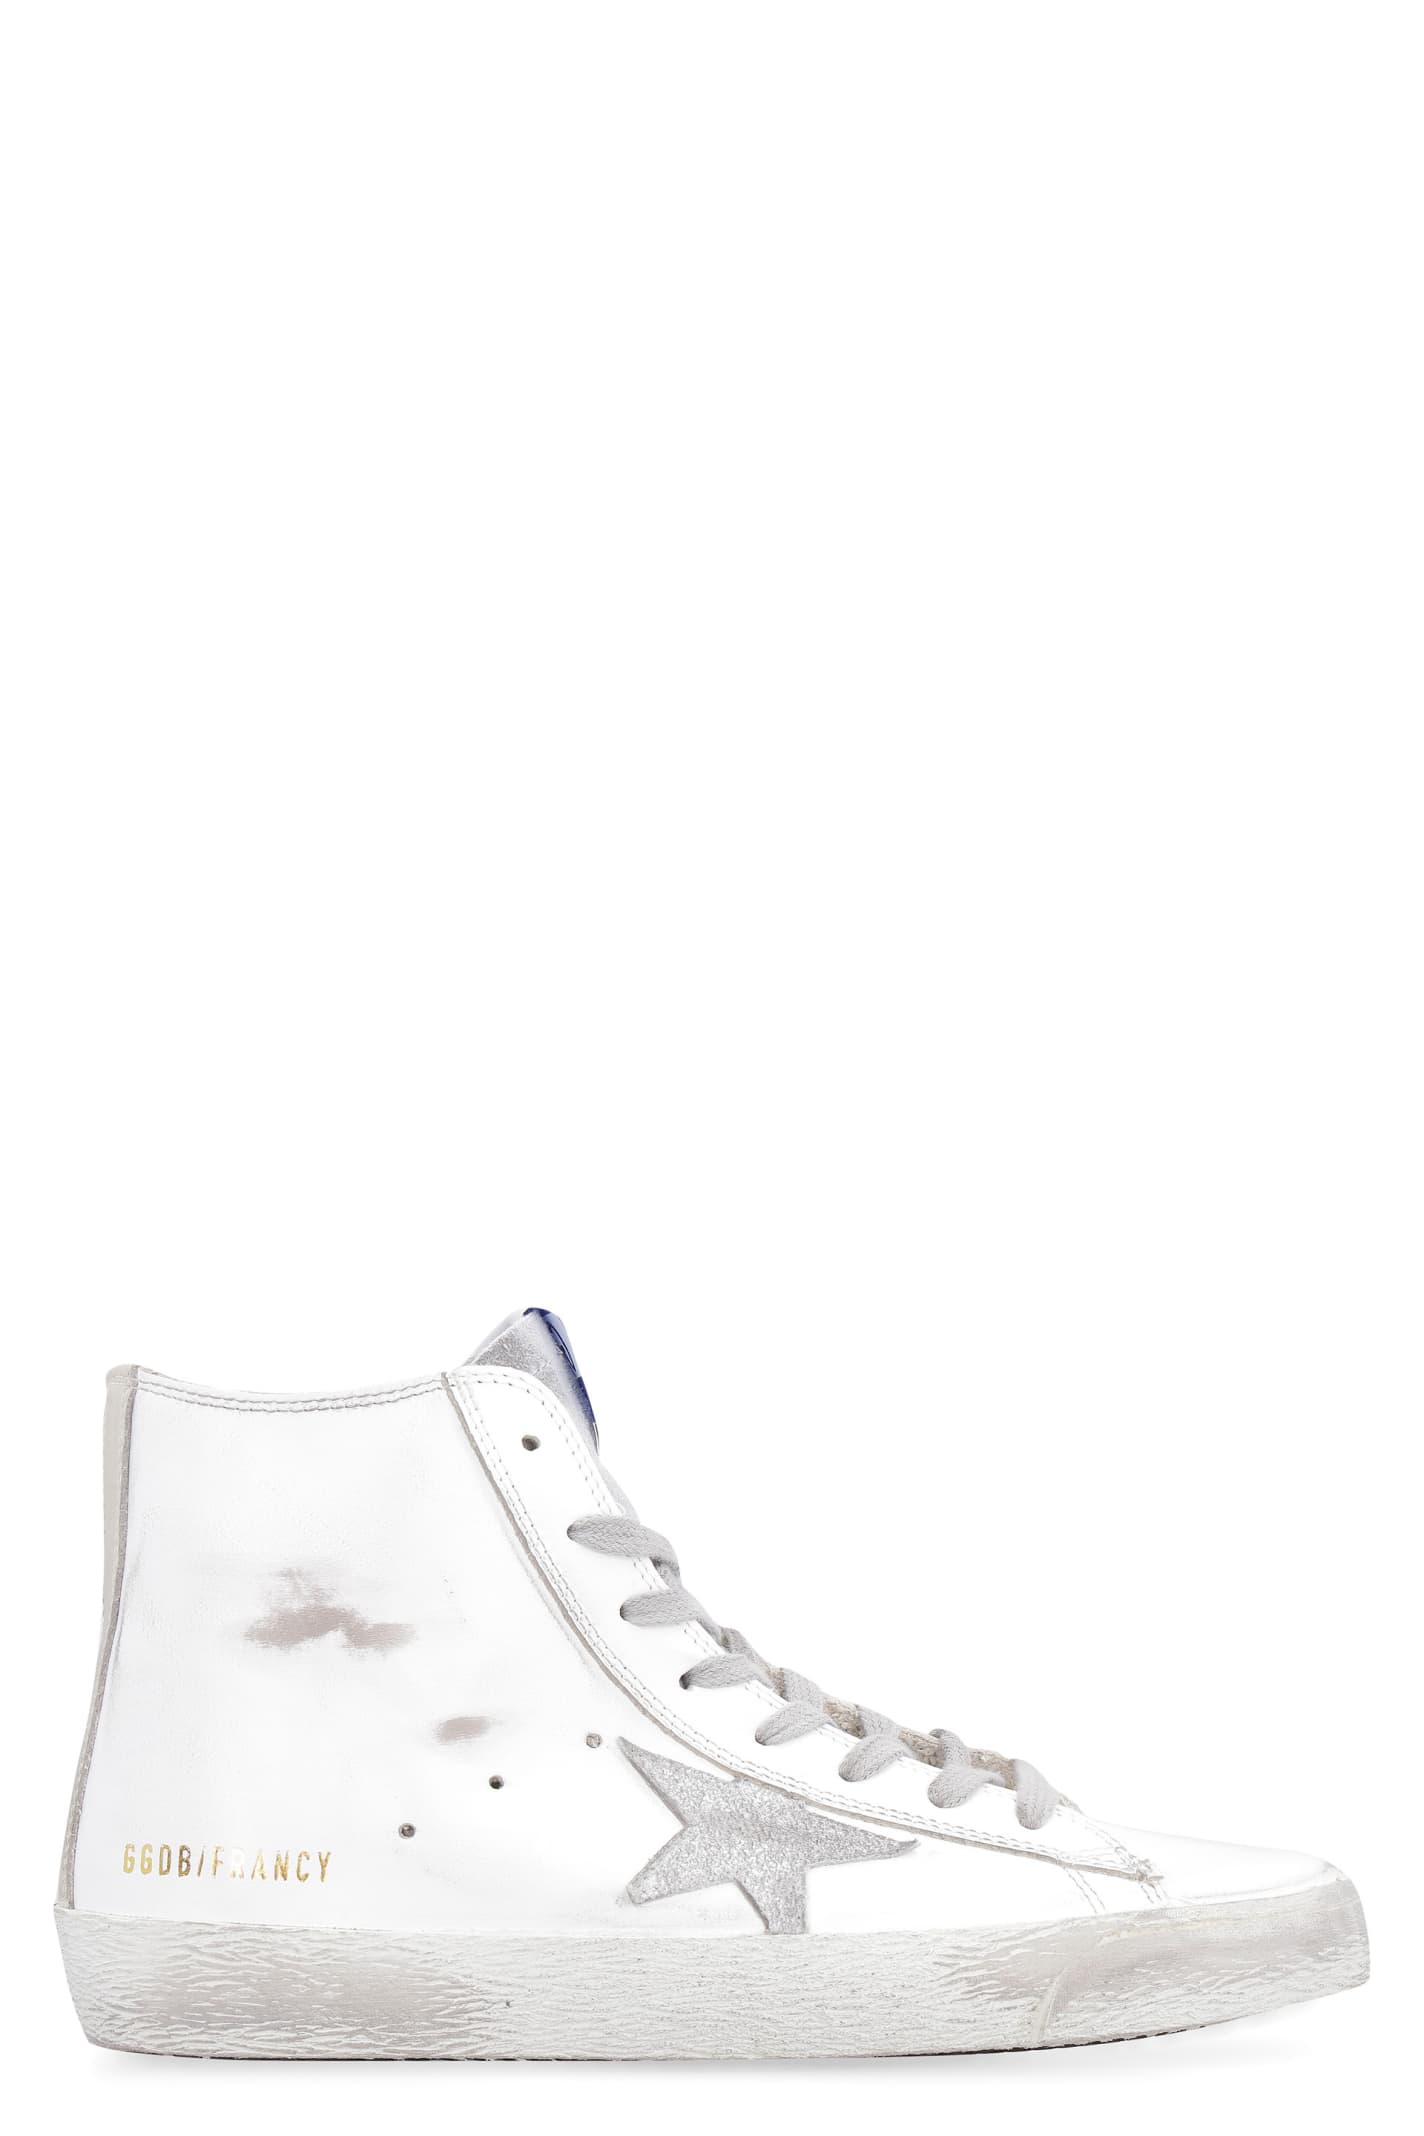 Golden Goose Francy Leather High-top Sneakers